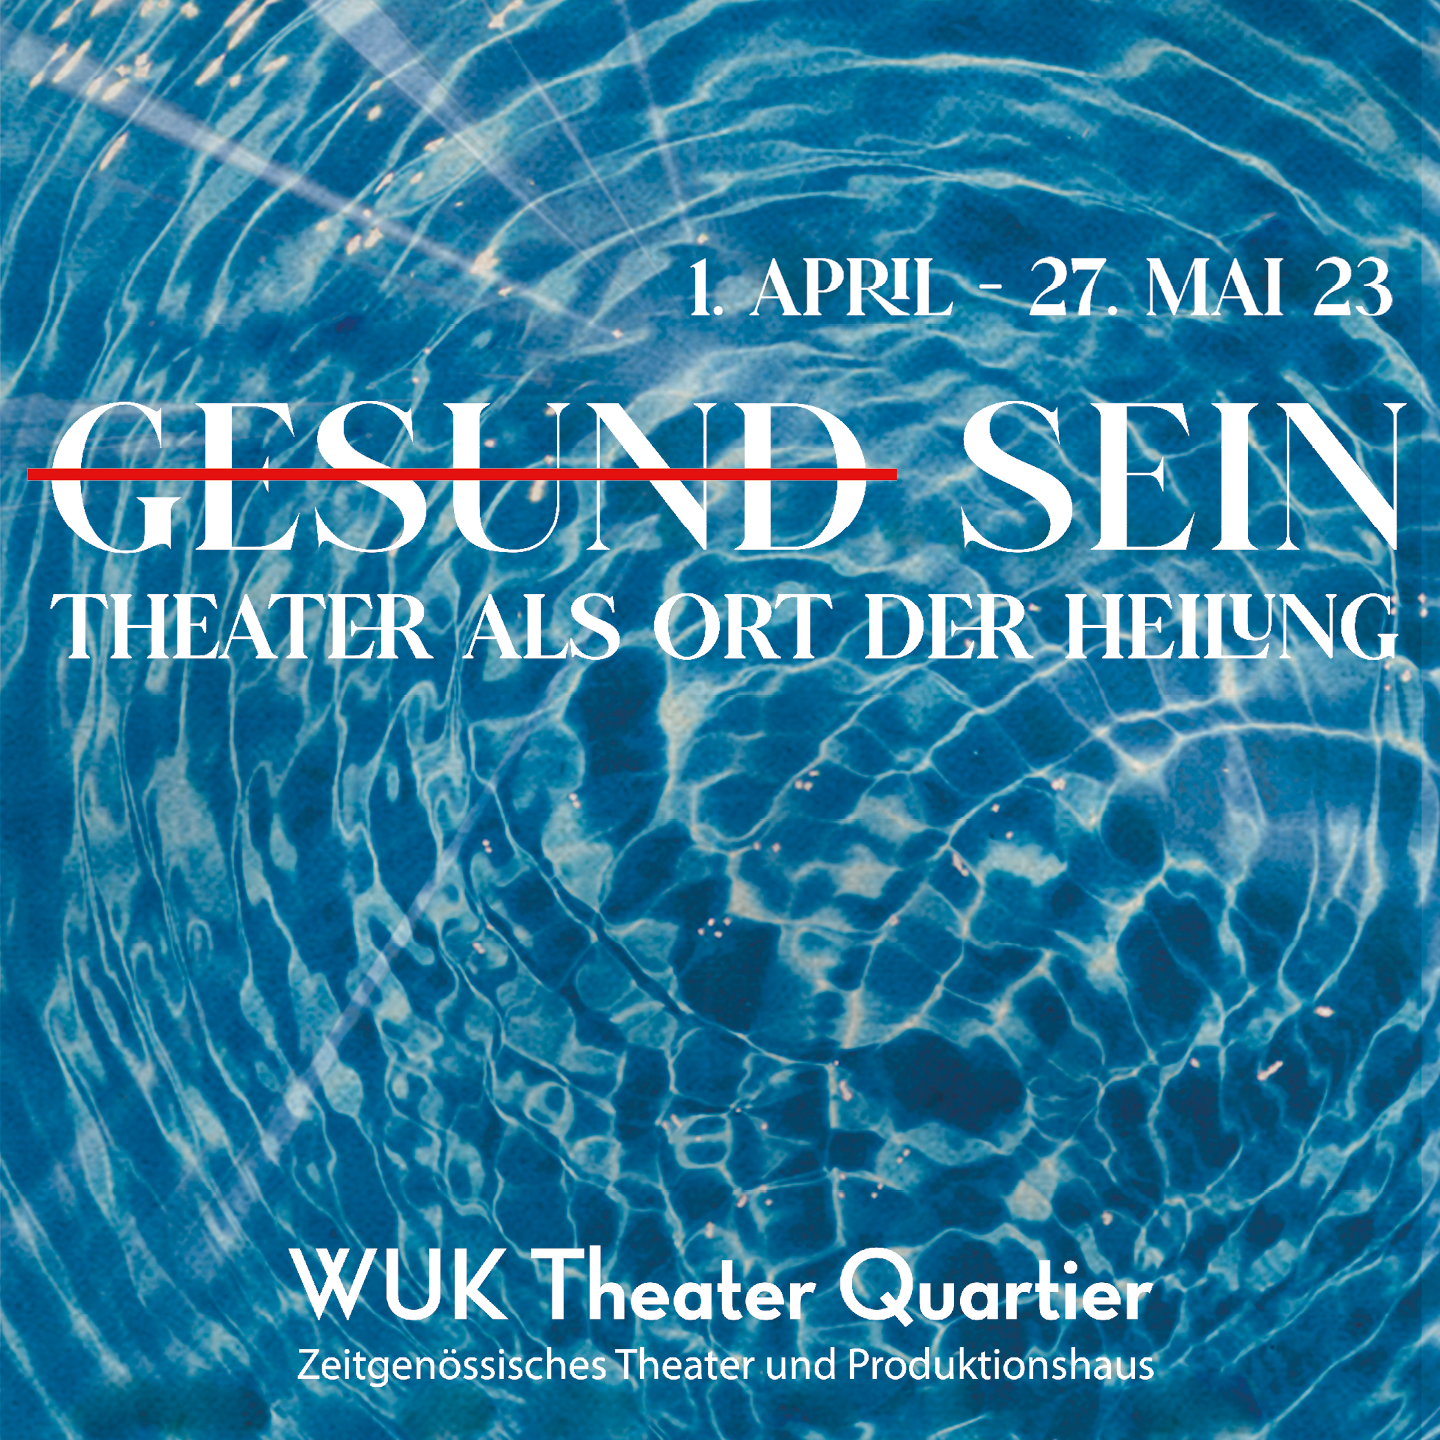 You are currently viewing #gesundsein